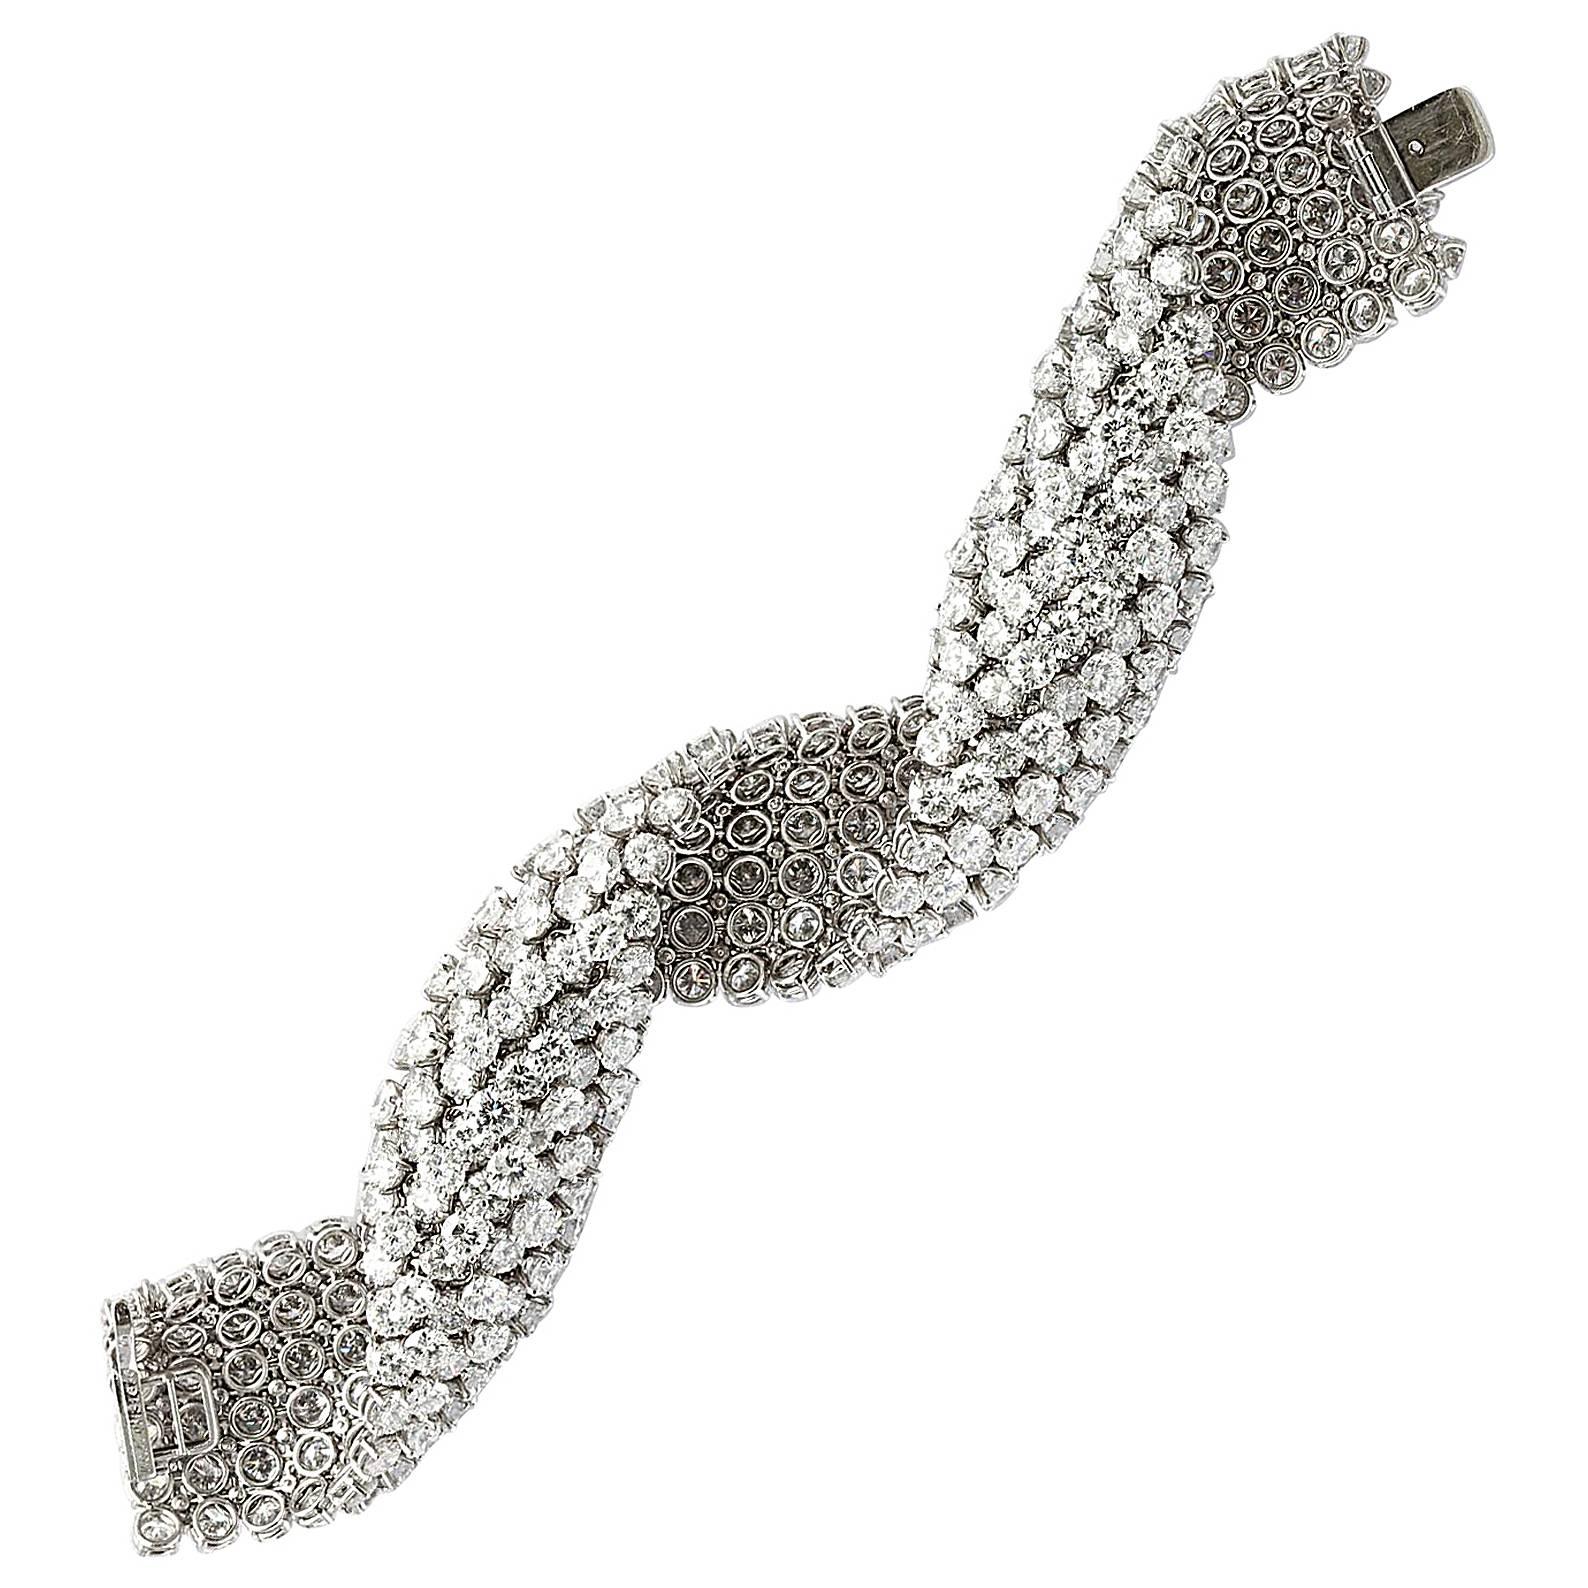 Important Van Cleef and Arpels Diamond Bracelet

Set with approx 110 cts of fine brilliant cut diamonds

Very well made and flexible

Identical model in legendary Brooke Astor collection

With Certificate of Authenticity

Made in NY in